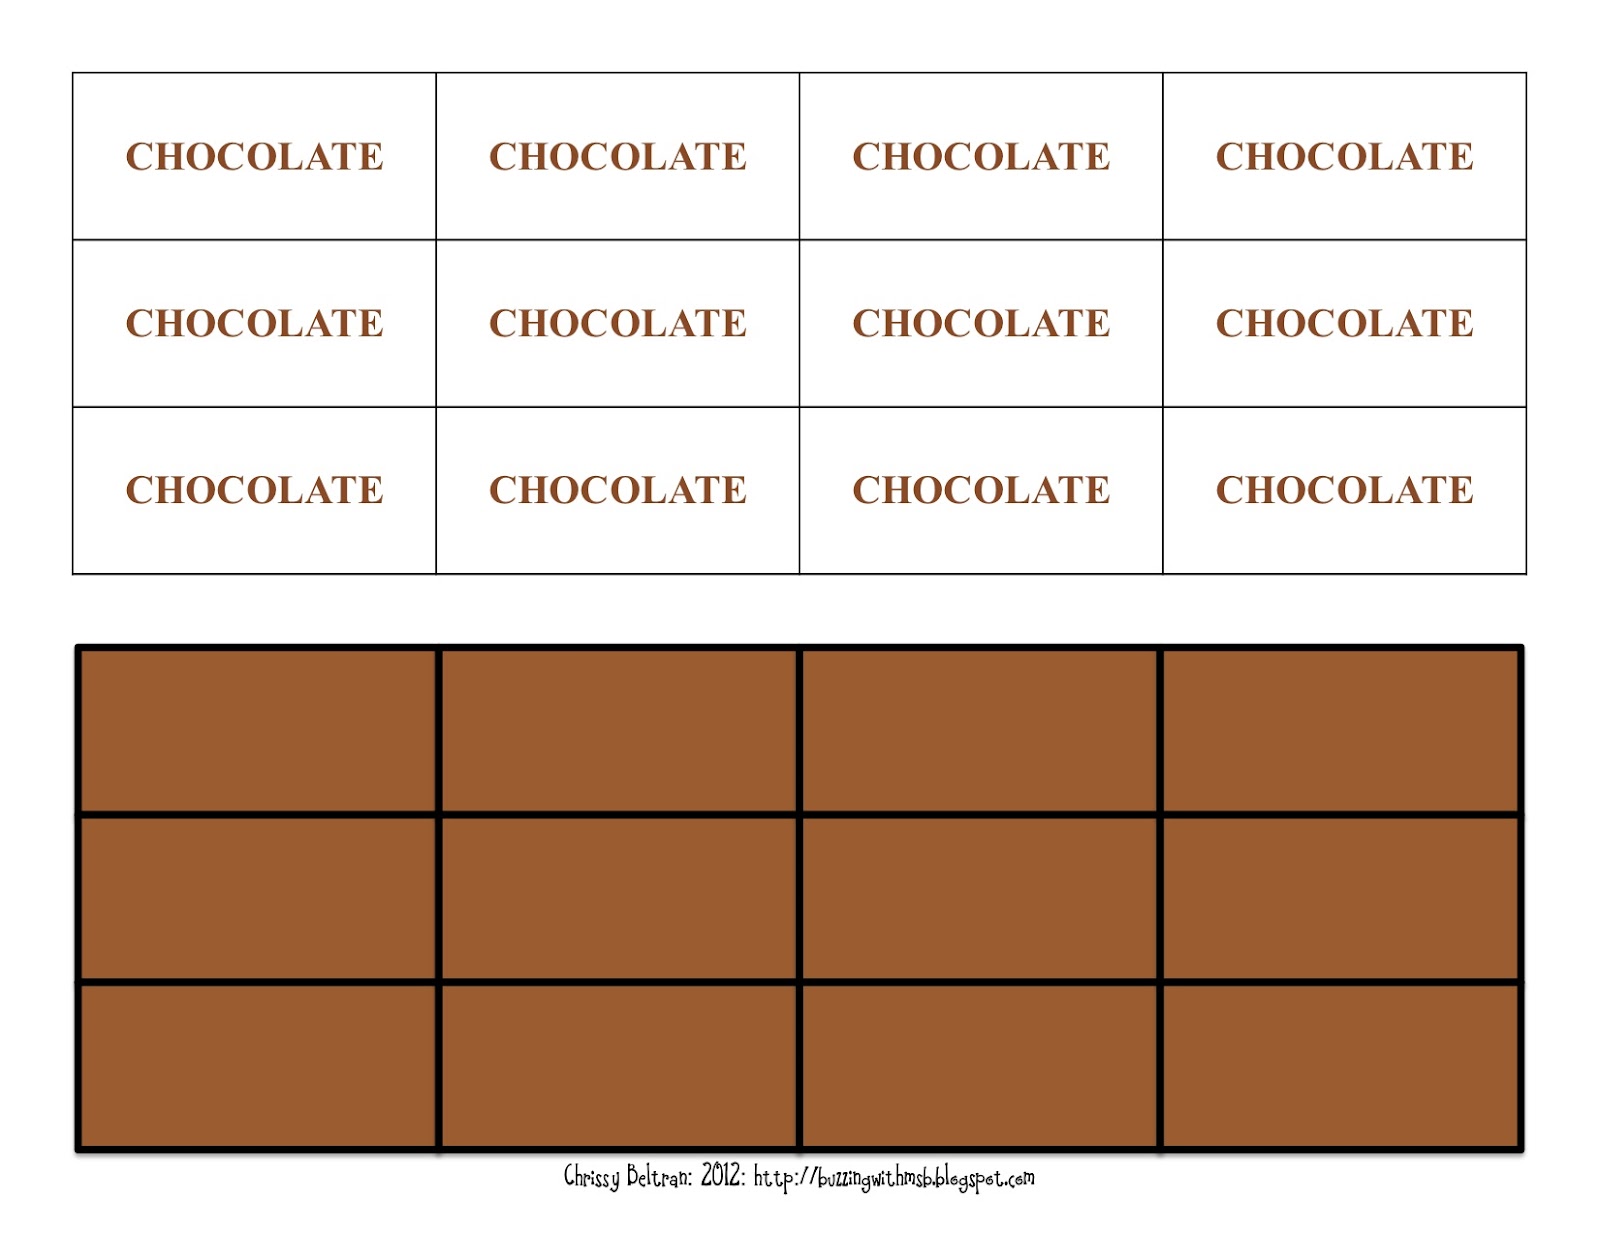 3-6 Free Resources: Hershey's Fraction Book: Chocolate Pieces